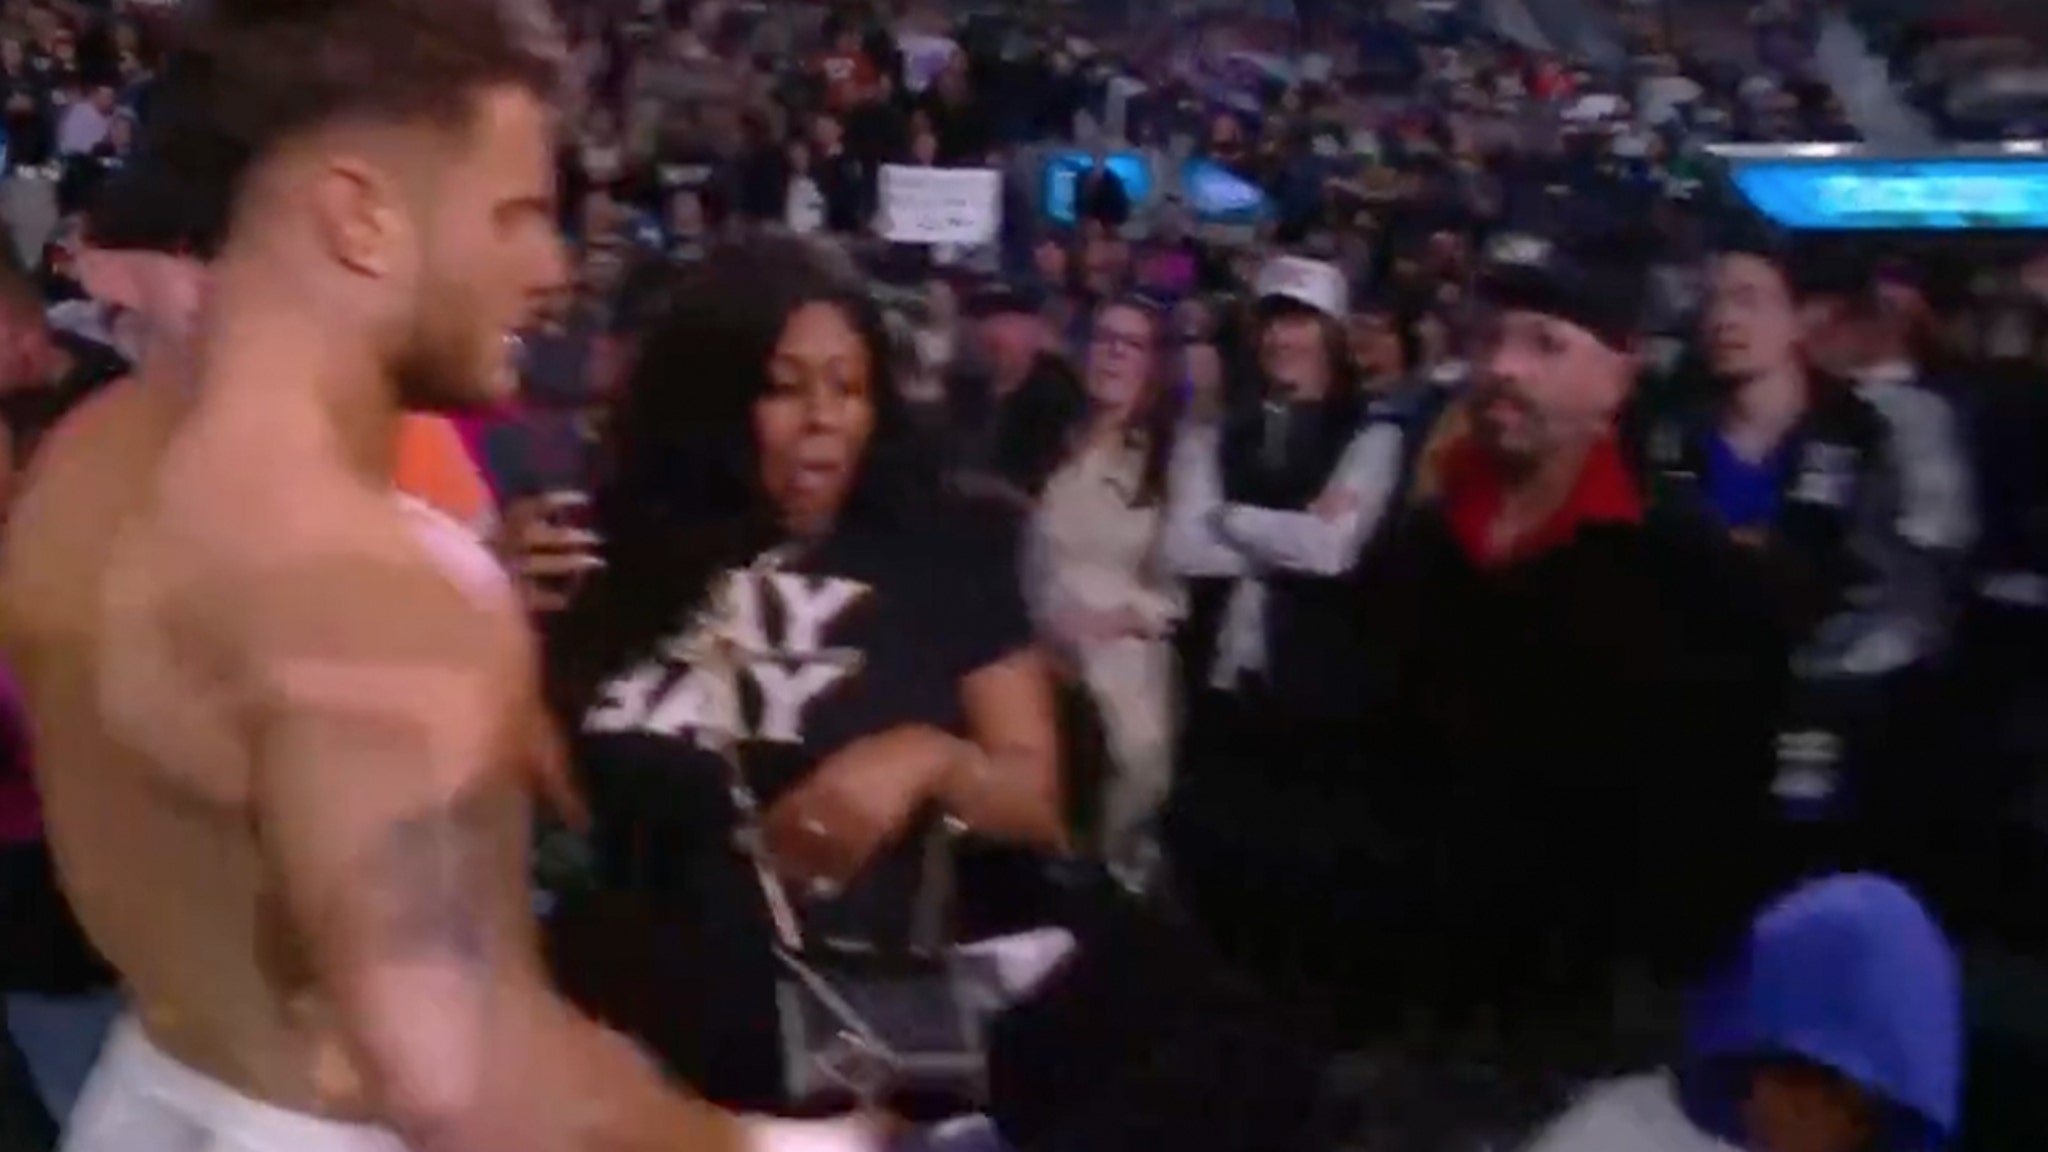 AEW Star MJF Throws Drink On Kid In Crowd At ‘Revolution,’ Young Fan Pissed